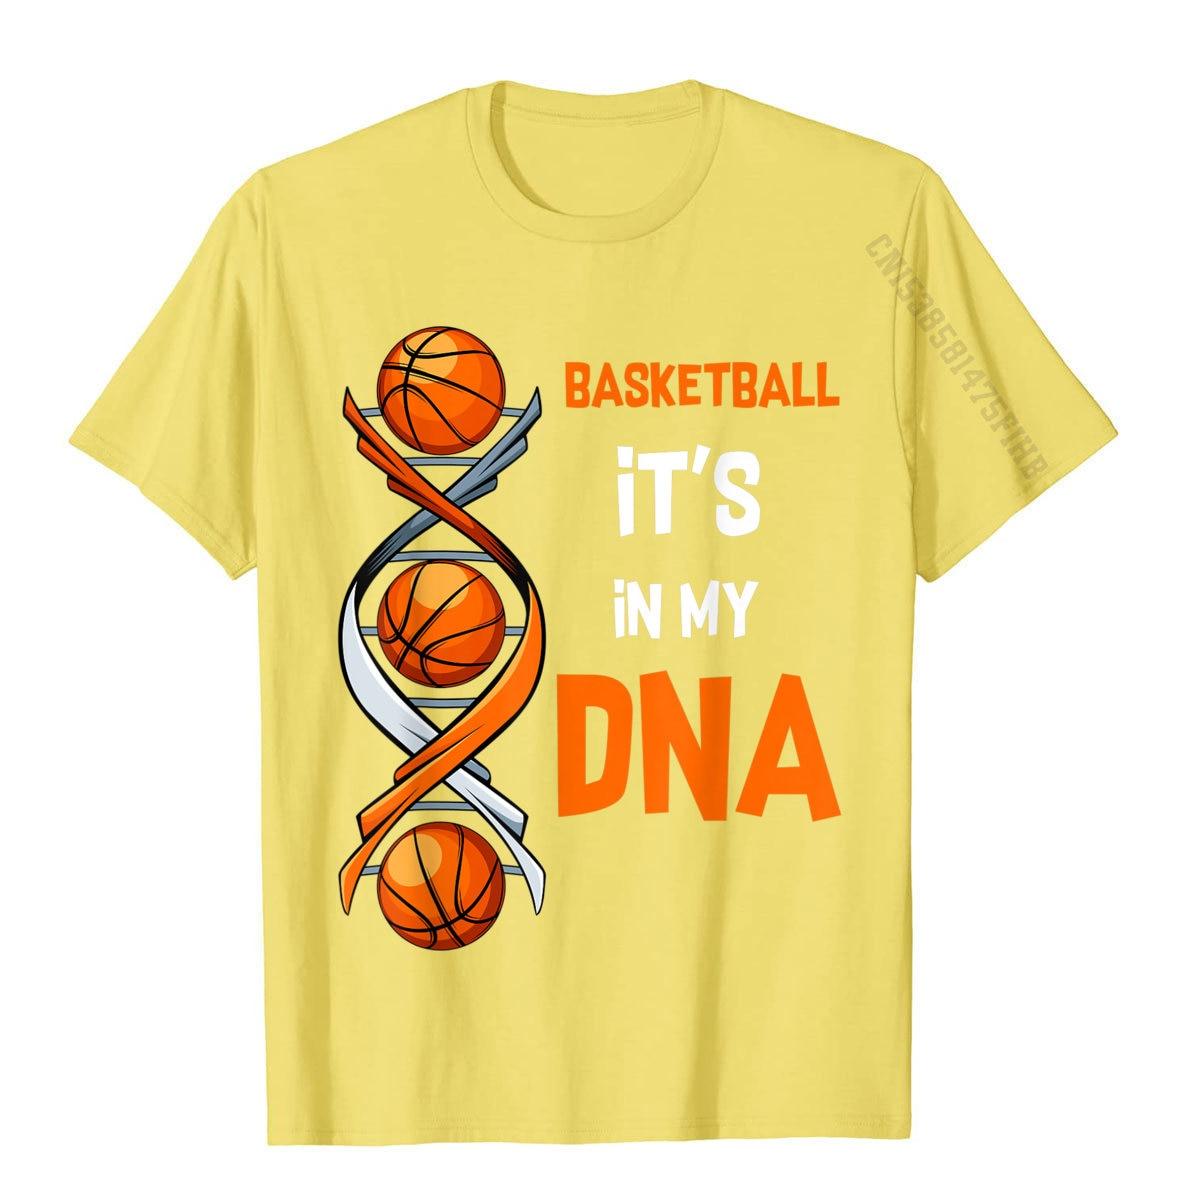 Camiseta Masculina Basketball It's In My DNA - Use Conforto